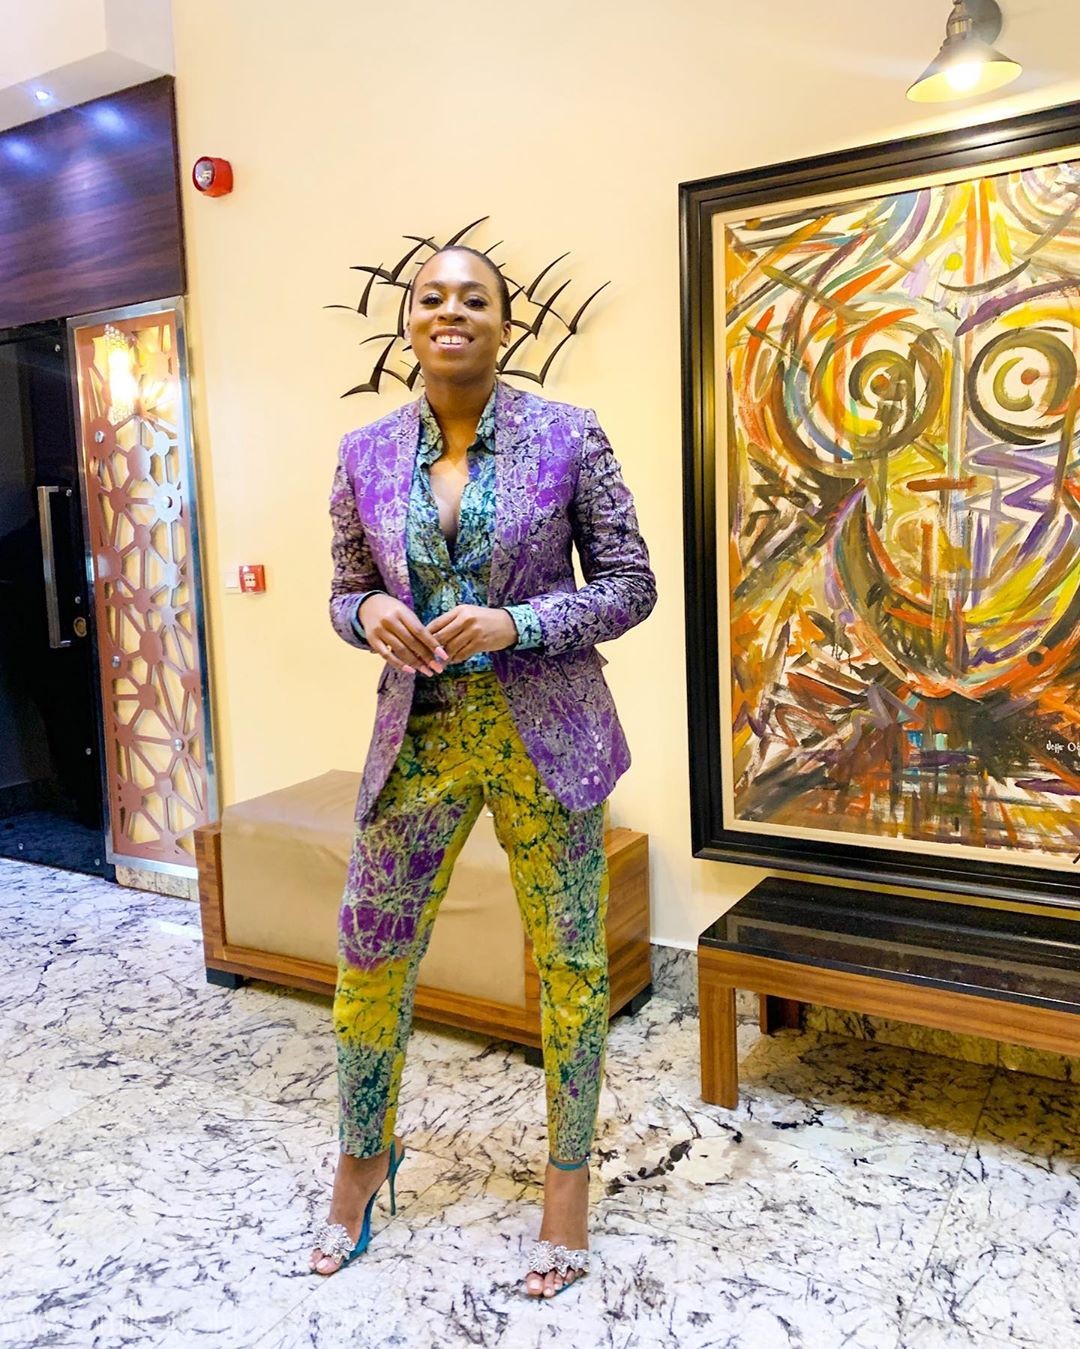 Who Wore This Three Piece Adire Suit By Ninie Better? Timini Egbuson Or Ozinna?